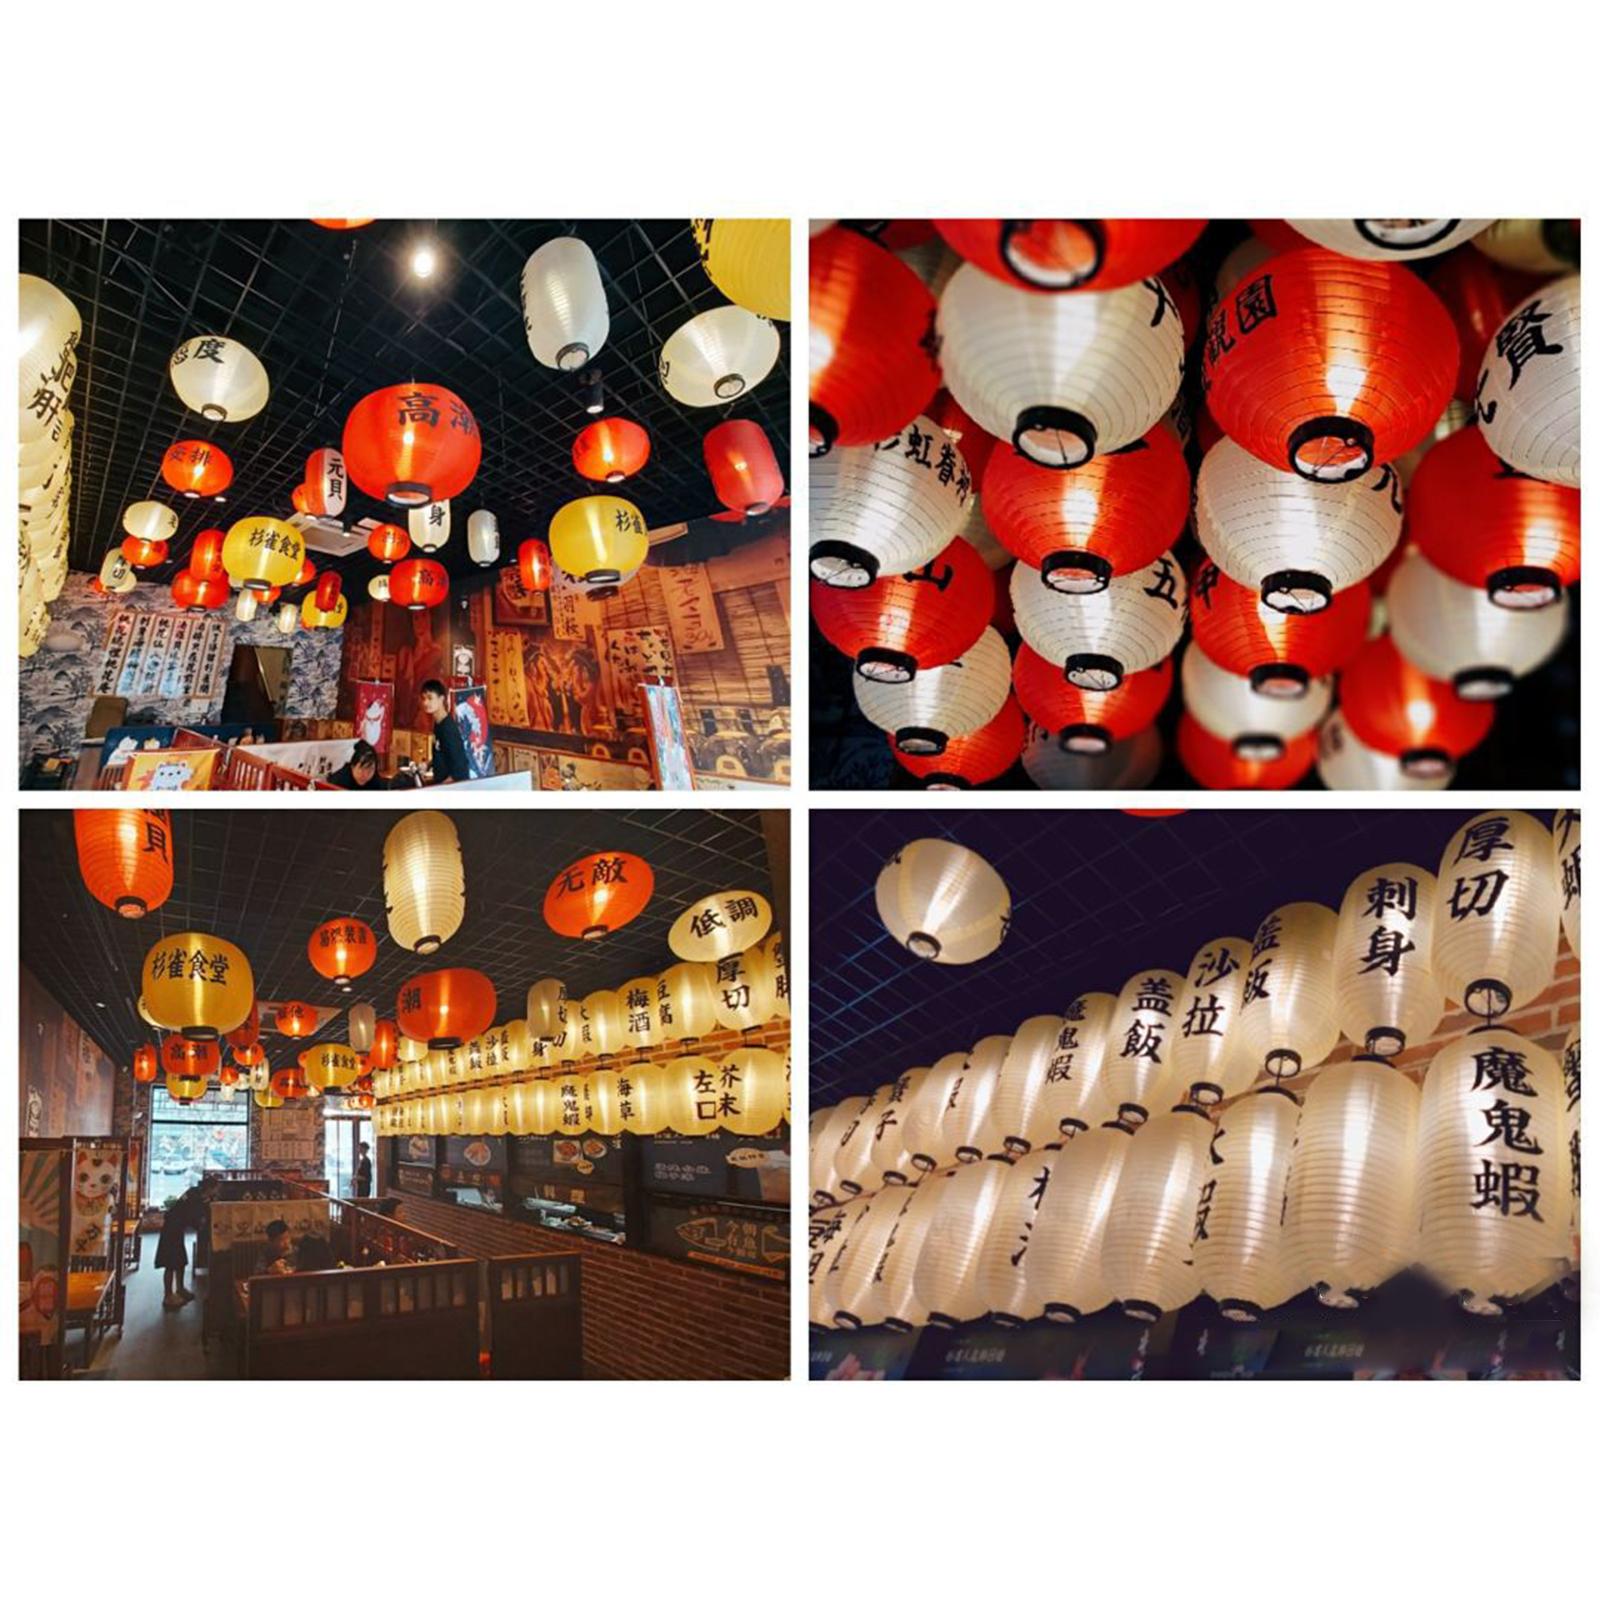 Lantern Satin Waterproof Decorations Foldable Japanese for Home Pub Festival 10 inch White B